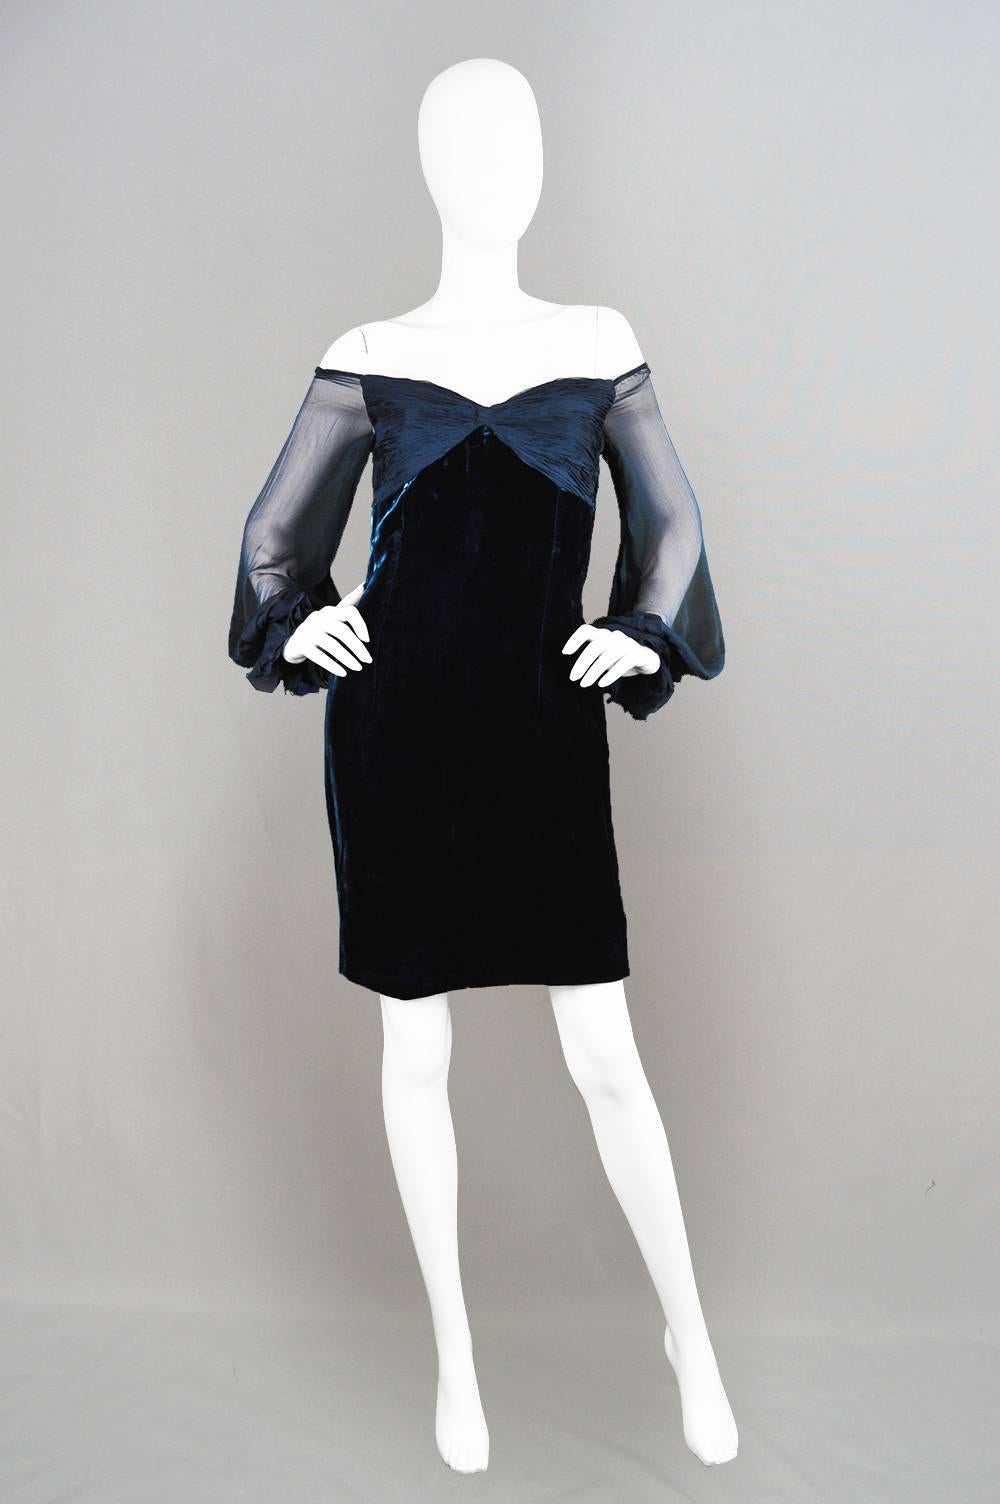 A stunning vintage party dress by Valentino for their boutique line, from the A/W 1991 collection. In a silky blue velvet with a ruched bust and sheer silk chiffon off the shoulder sleeves, creating a glamorous look with loads of sex appeal.